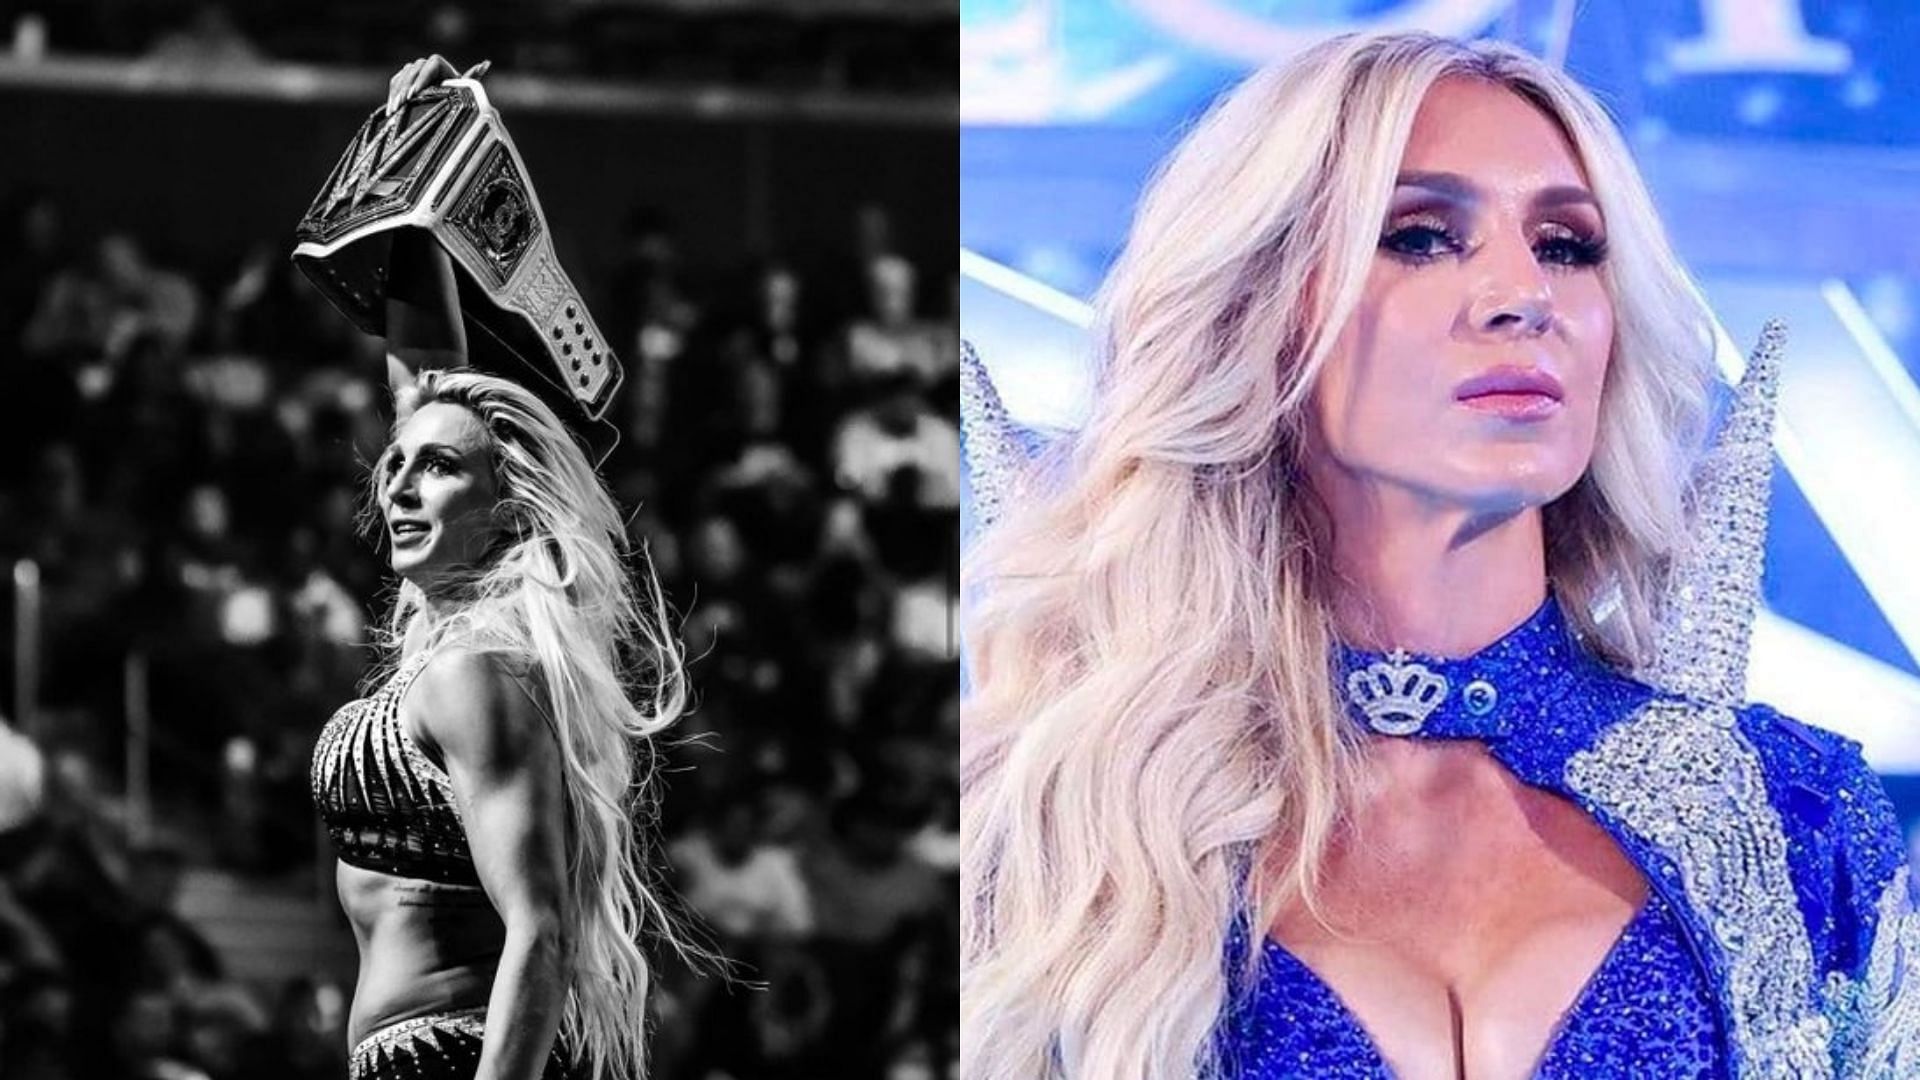 Charlotte Flair is the most wanted female wrestler in WWE today.